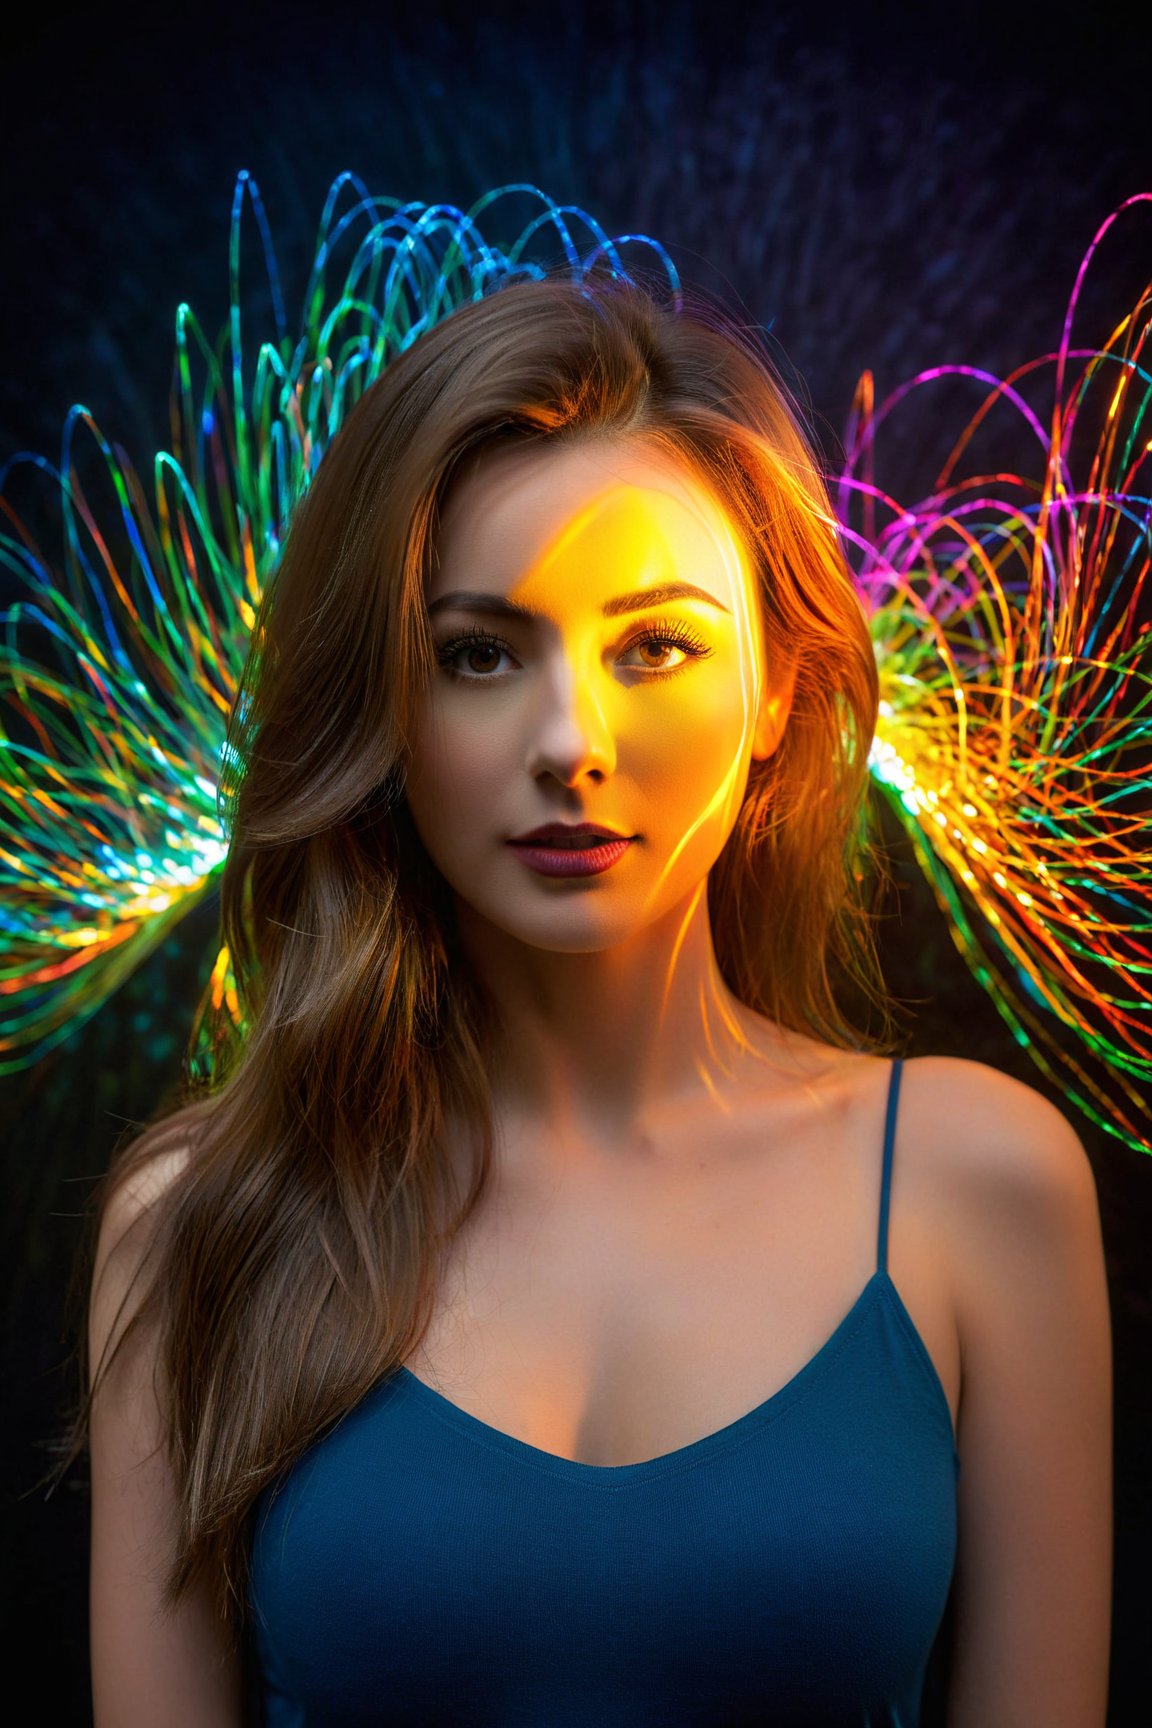 best quality, 4k, 8k, highres, masterpiece:1.2), ultra-detailed, (realistic, photorealistic, photo-realistic:1.37), Luminogram portrait with fiber optic light painting, Light field photography, Light painting, Light tracing, portraits, bokeh, studio lighting, physically-based rendering, vivid colors, sharp focus, reverse vignette, ethereal glow, colorful, delicate details, soft shadows, luminescent strands, subtle highlights, ambient incandescent light, fantastical atmosphere, glowing figures, unconventional light sources, contrasting hues, fiber optic brushstrokes, hypnotic patterns, trail of lights